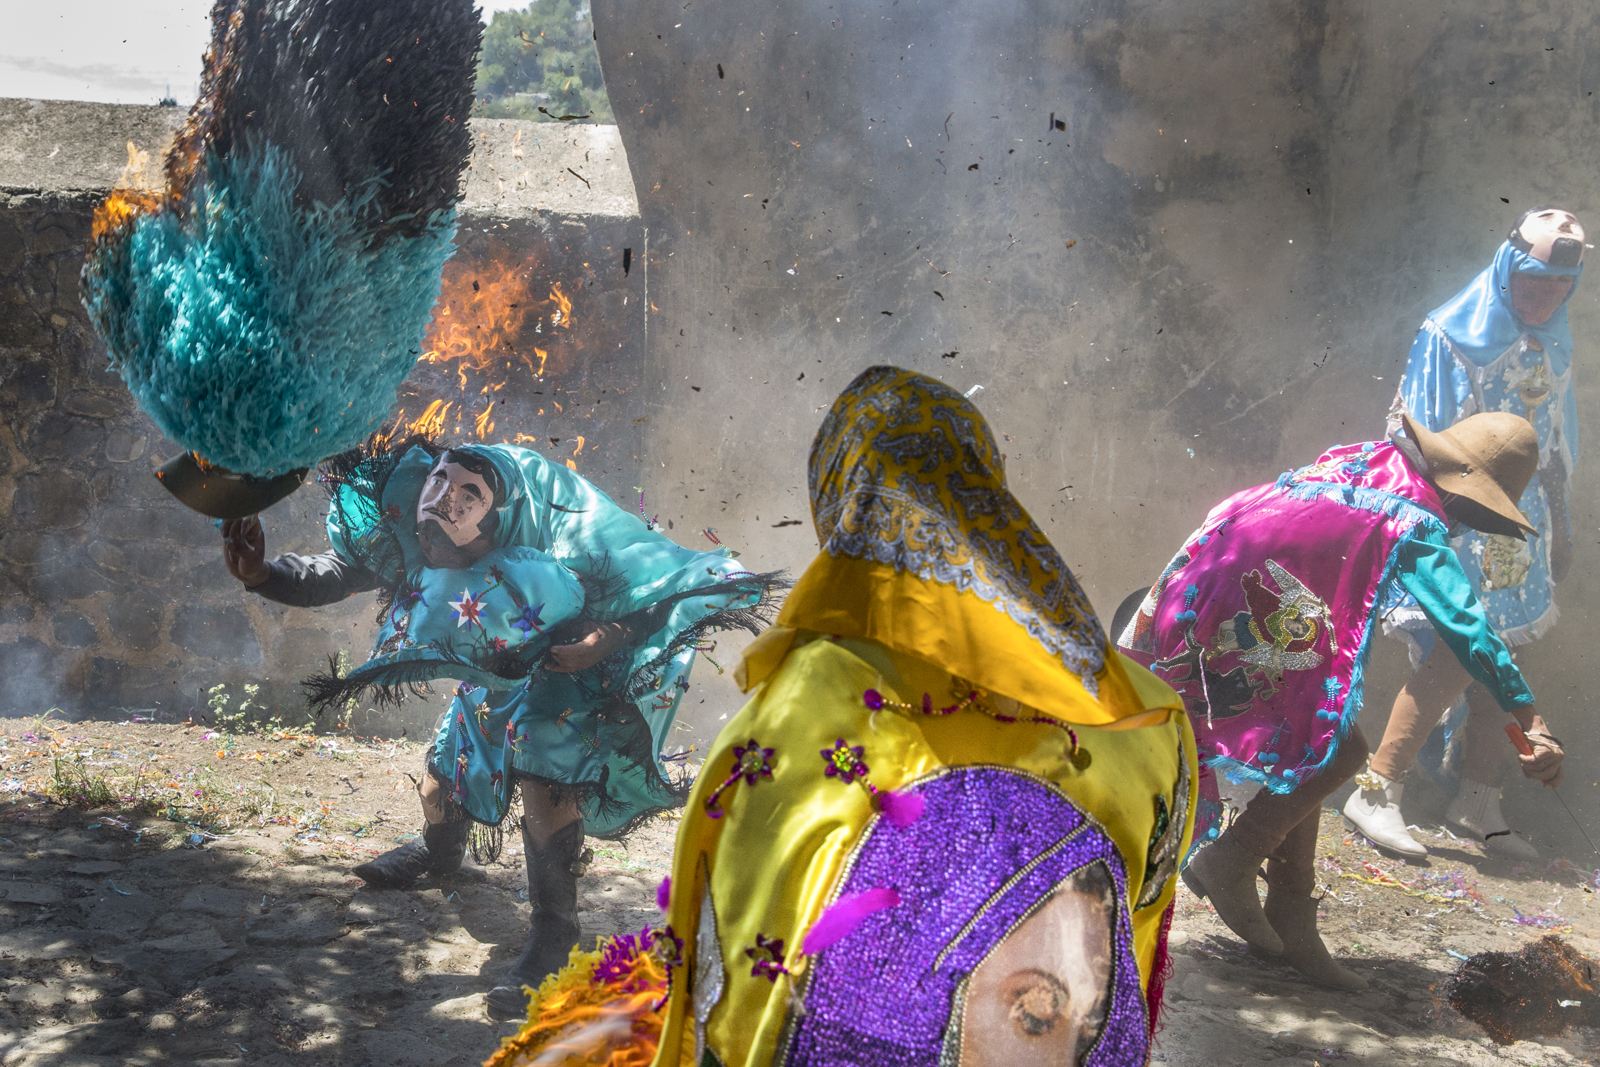 “Sayones" try to turn off their hats on fire during the Sunday ceremony that ends Holy Week in Tetela del Volcan, Morelos, Mexico. The Sayones, whose costumes are typical of the village, impersonate the Roman soldiers who killed Jesus. Their costumes are brightly colored with figures of saints, they hold machetes and wear a goat leather mask and big paper hats. After the mass that ends Holy Week on Sunday they run among the public attending the ceremony, and people throw lit matches at them to set their hats on fire, in sign of vengeance for their murderous act.